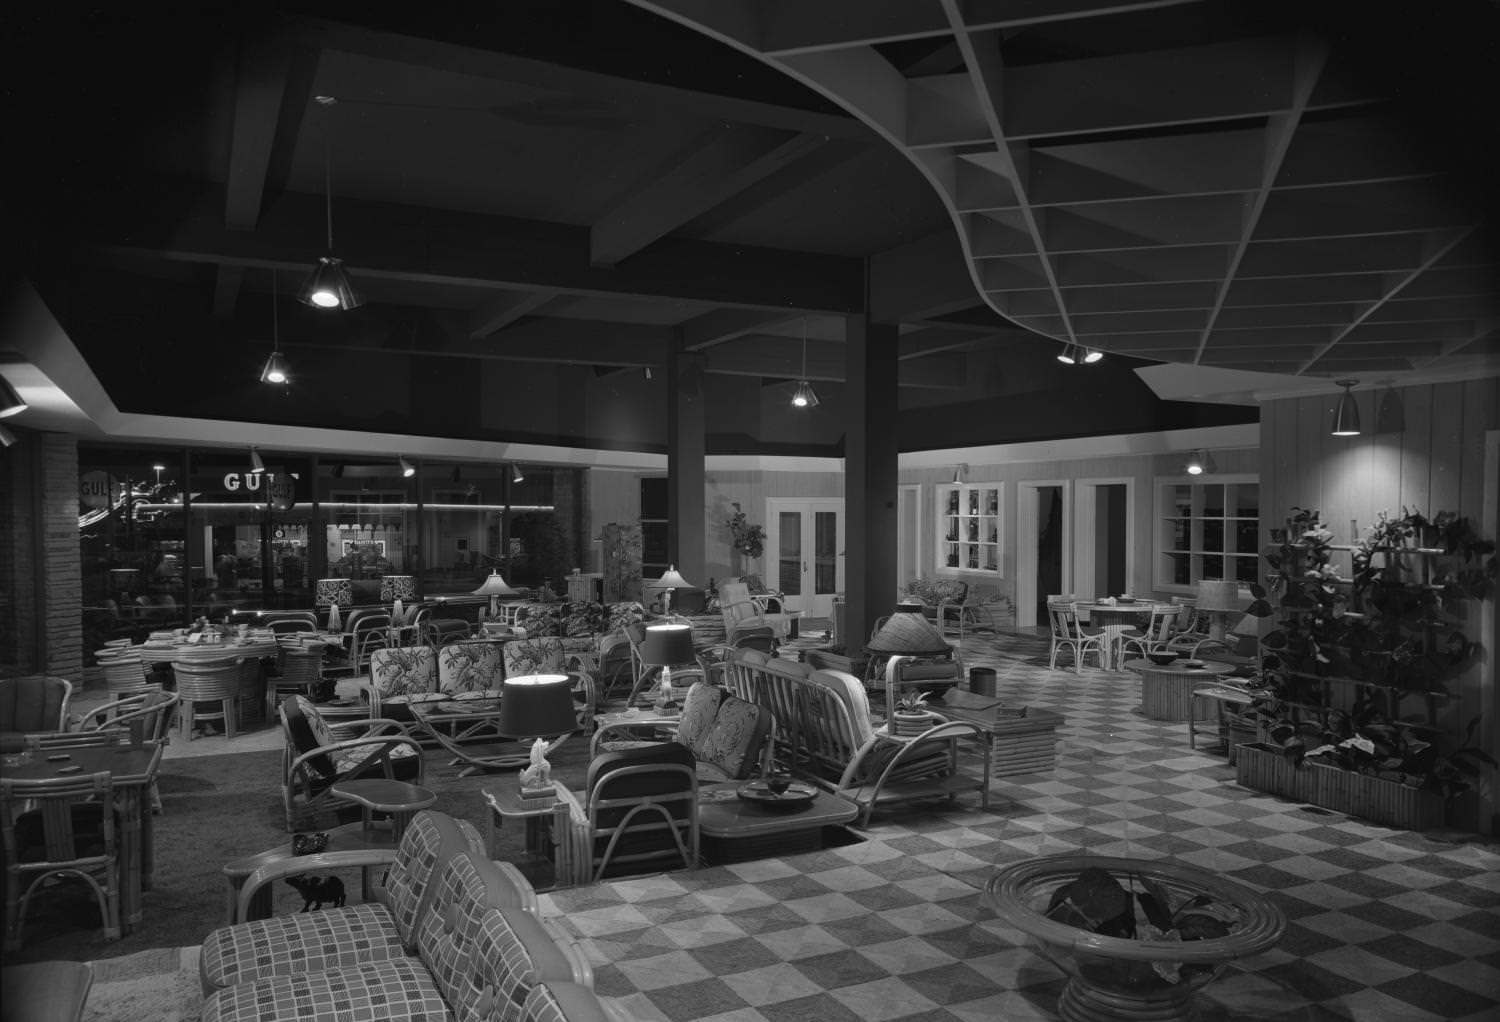 The Austin Tropic Shop furniture store. There are numerous types of rattan furniture on display, 1950